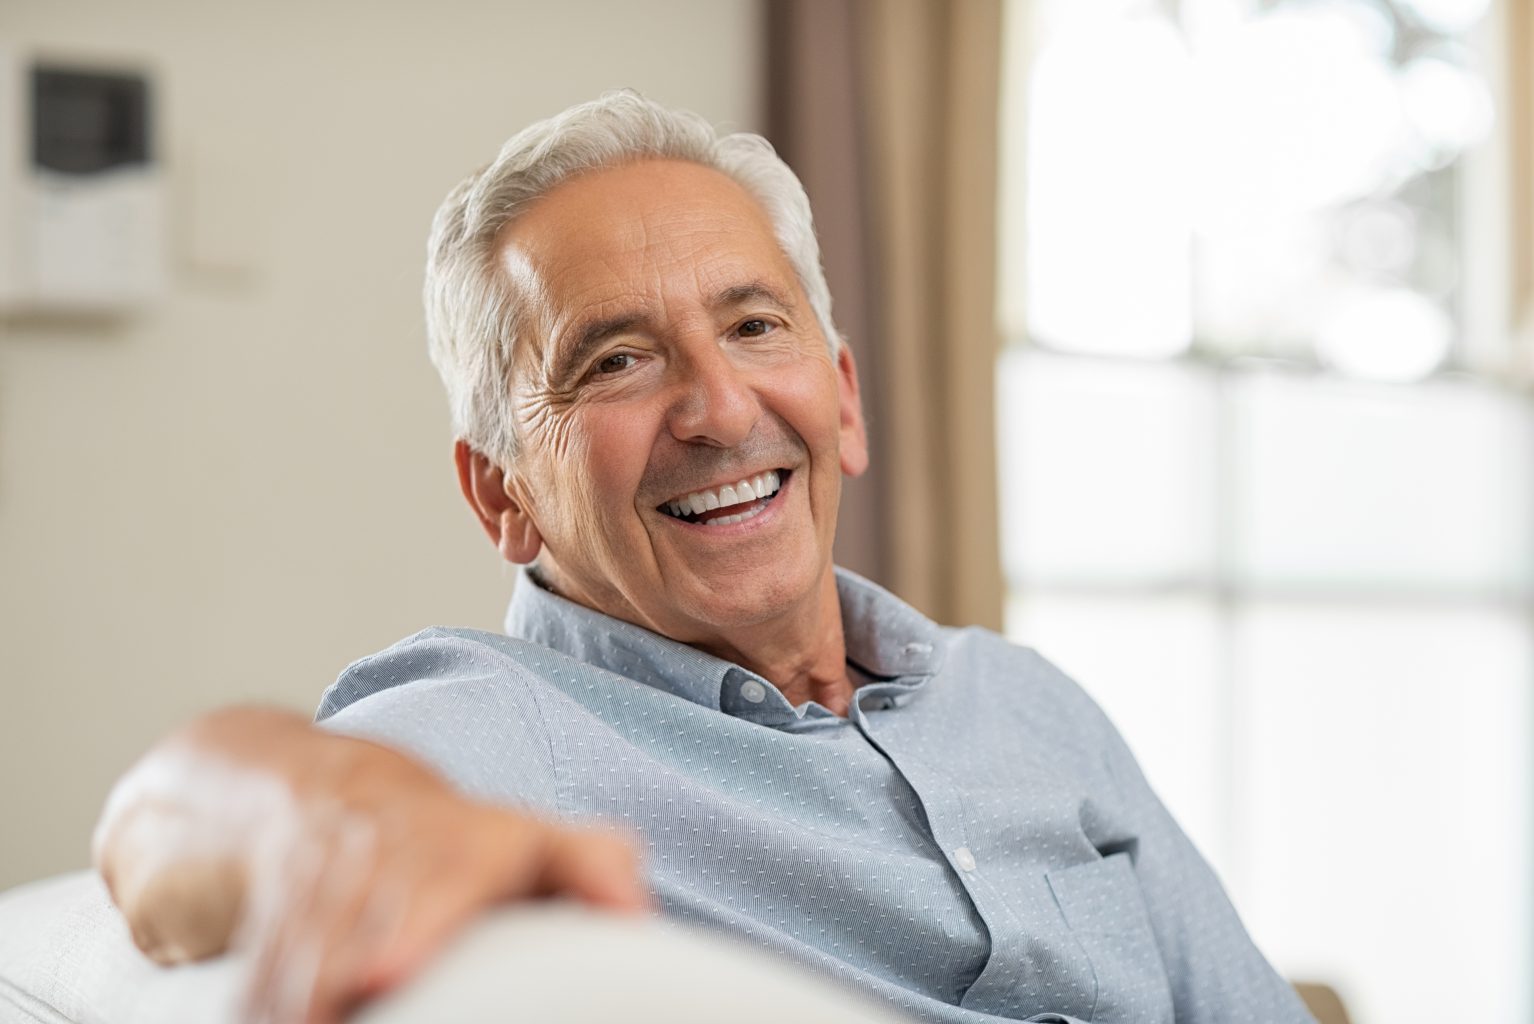 Senior man with dentures relaxing on sofa and looking at camera.